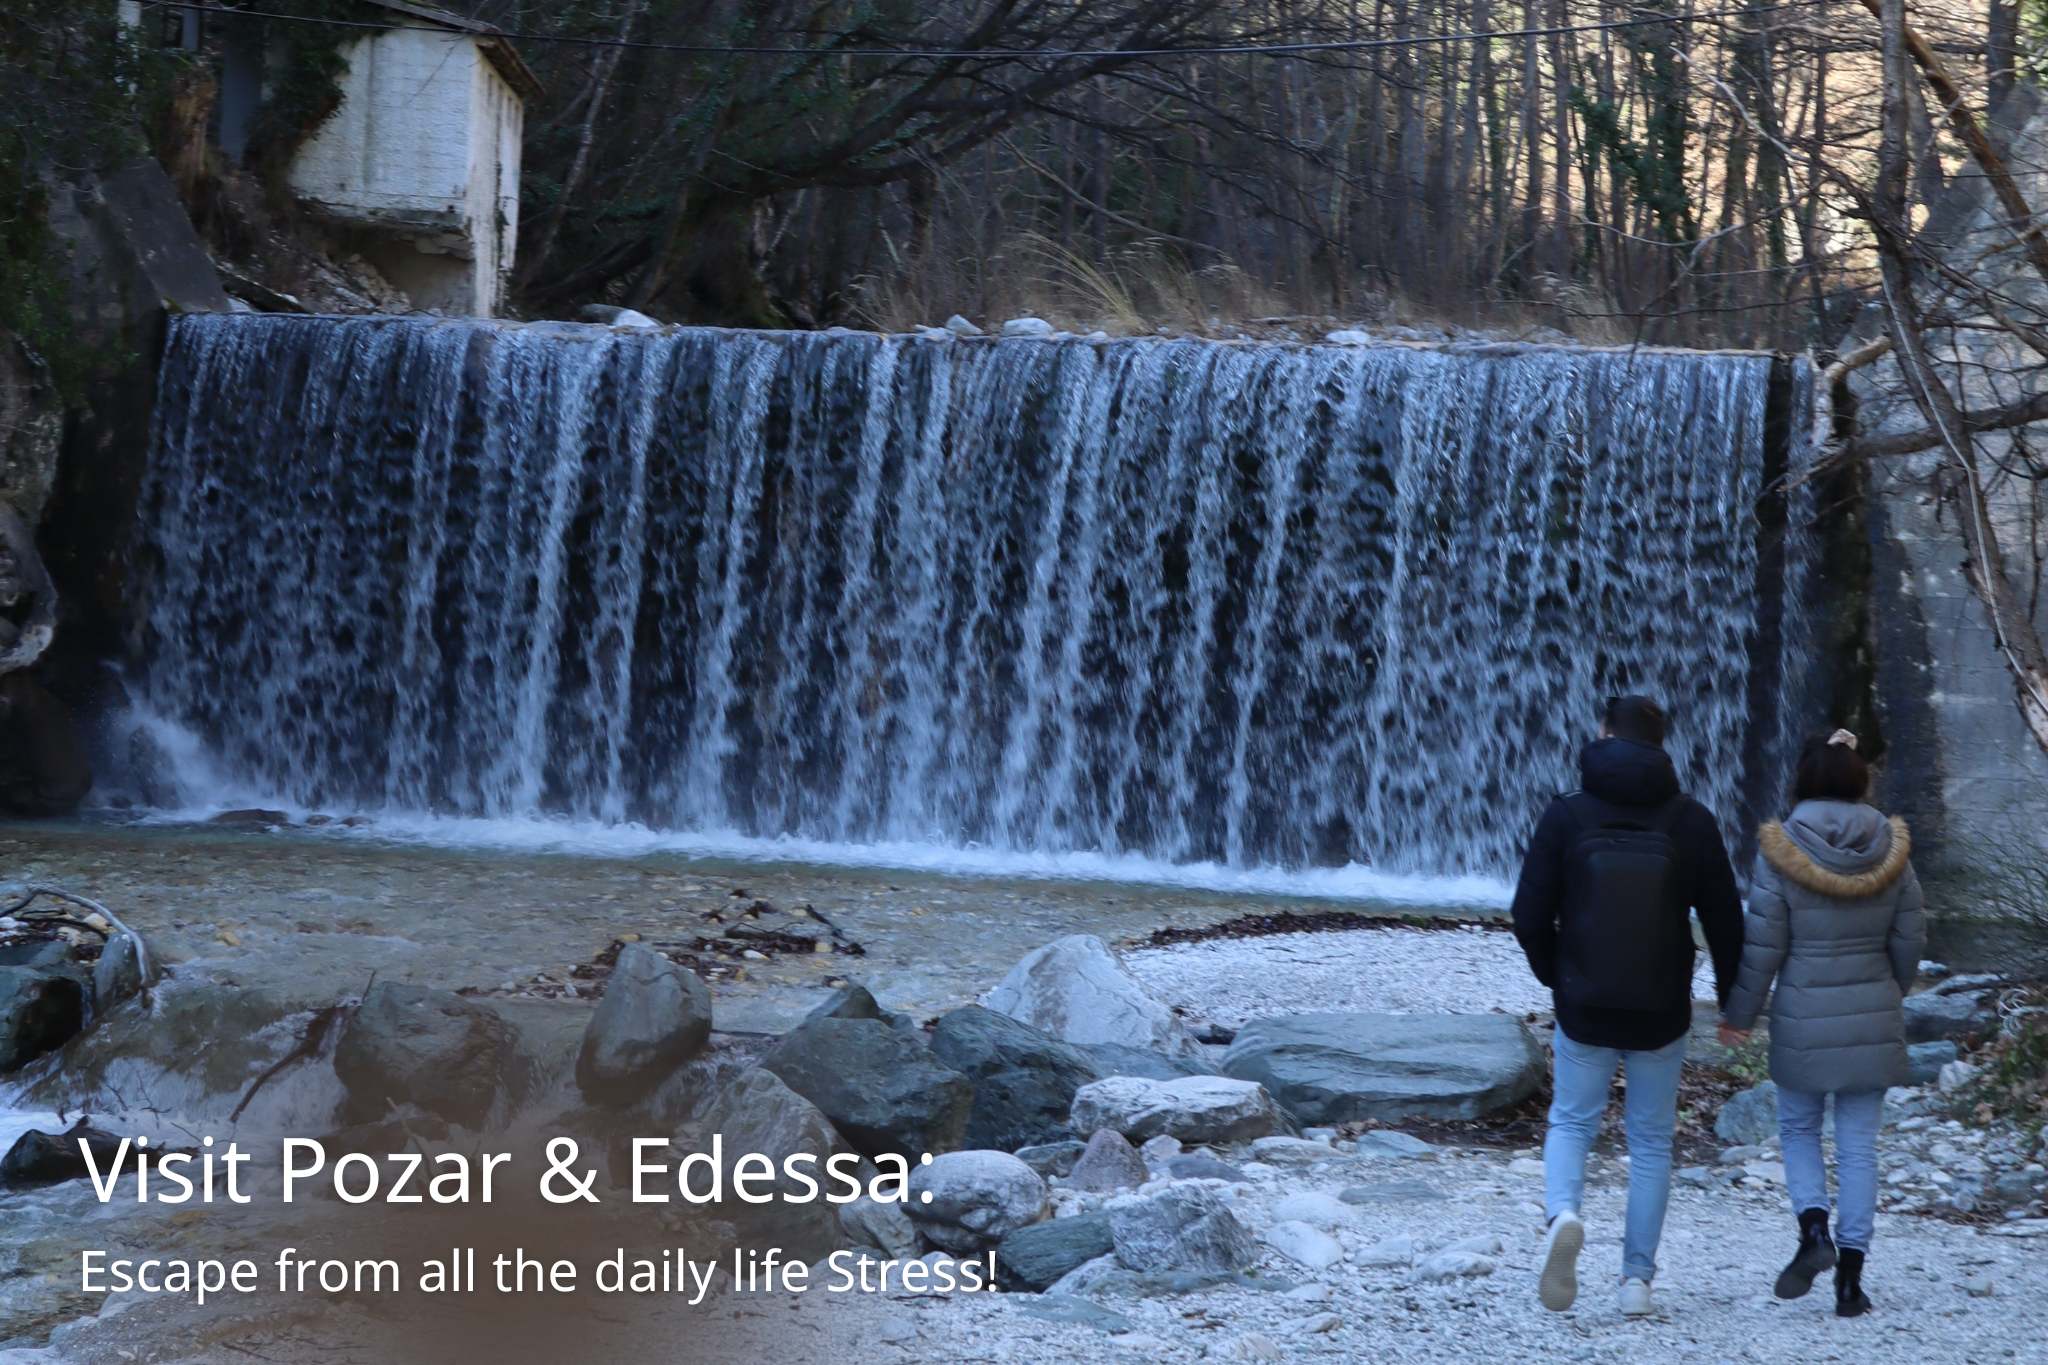 visit-pozar-edessa-escape-from-all-the-daily-life-stress